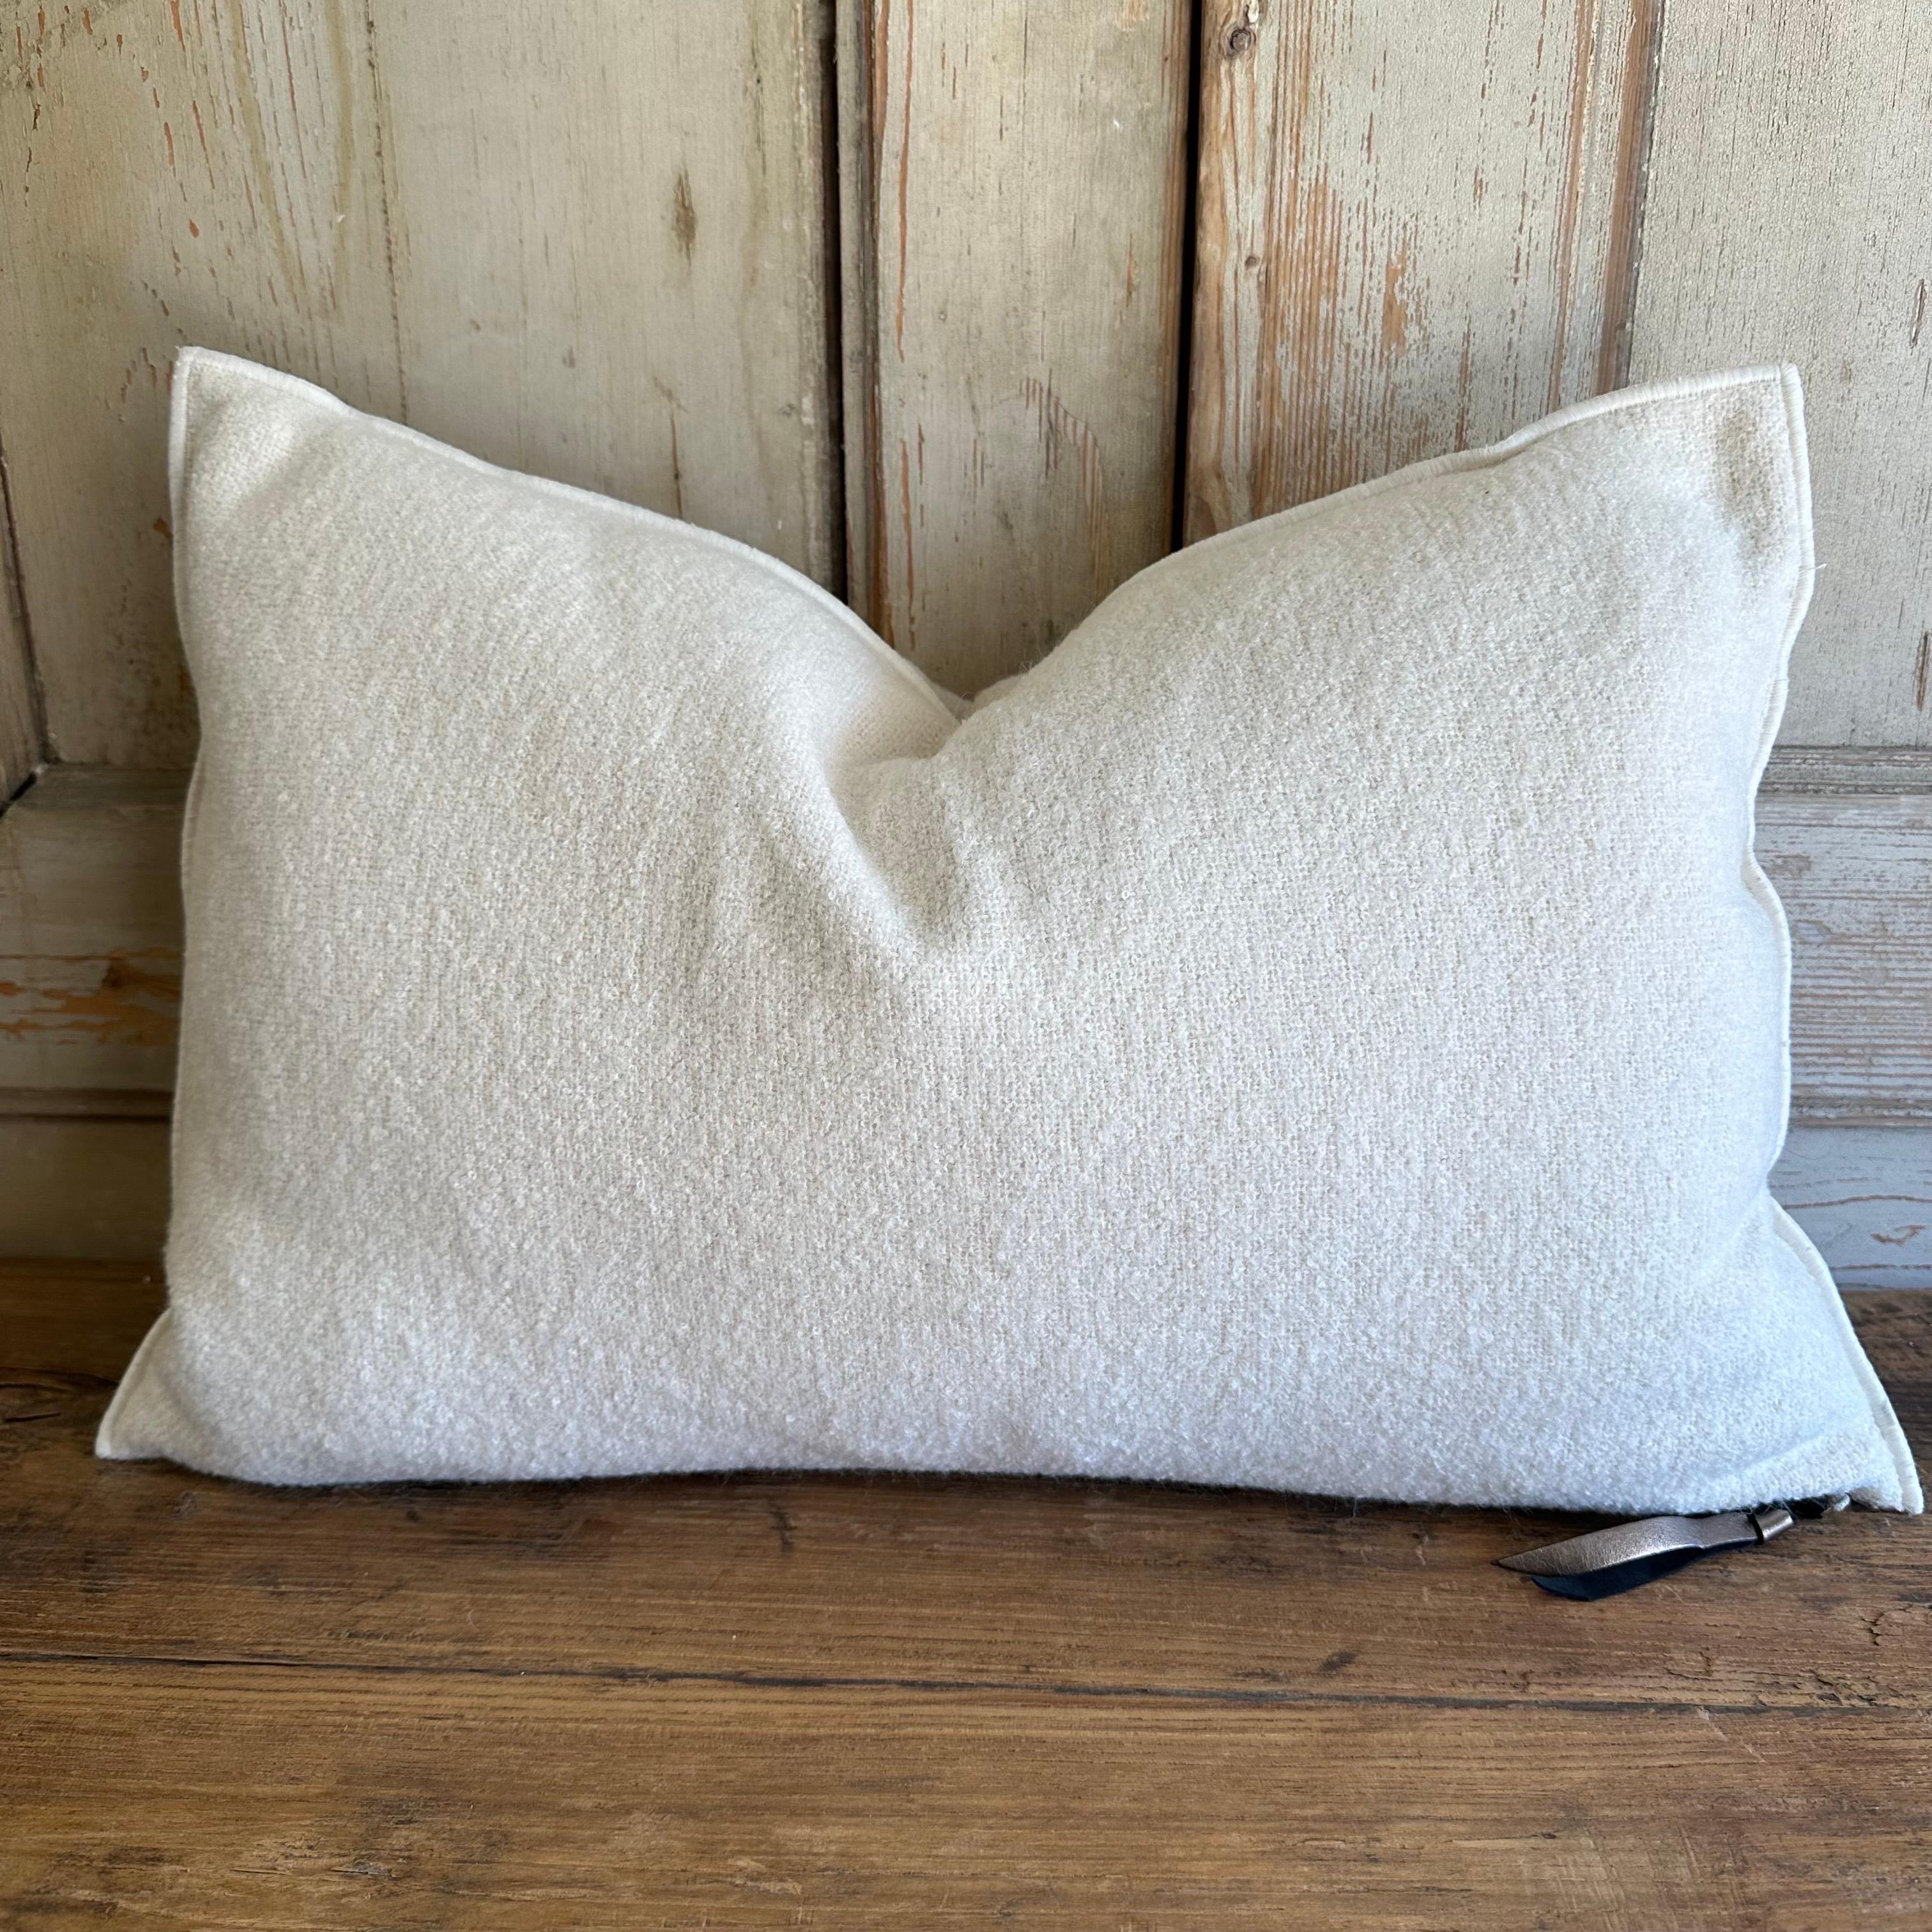 Custom wool blend accent pillow with down insert 
Color: Blance (a soft white or off white colored) nubby boucle style pillow with a stitched edge, metal zipper closure. 
Size: 14”x23”
Our pillows are constructed with vintage one of a kind